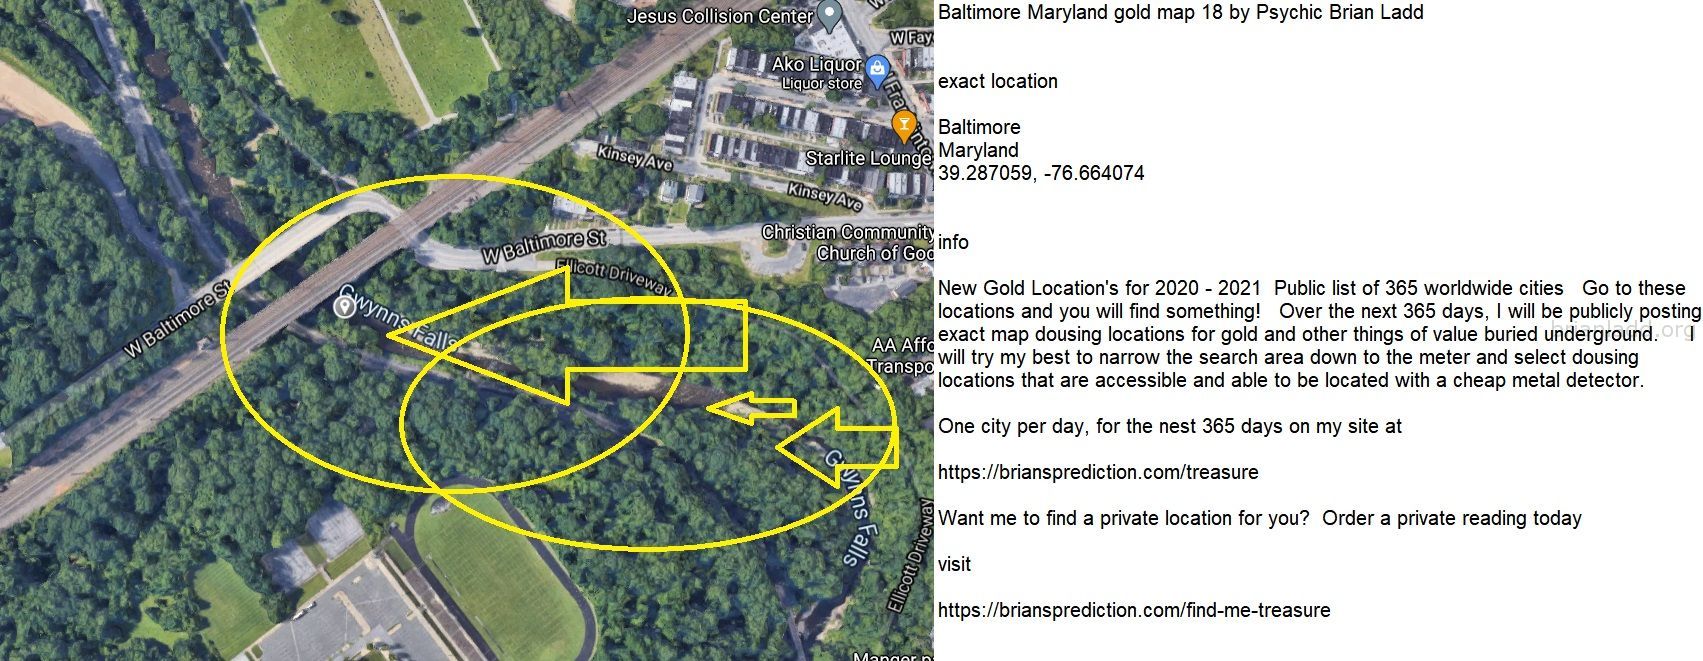 Baltimore Maryland Gold Map 19 By Psychic Brian Ladd - Baltimore Maryland Gold Map 19 by Psychic Brian Ladd Exact Locati...
Baltimore Maryland Gold Map 19 by Psychic Brian Ladd Exact Location Baltimore Maryland 39.287059, -76.664074 Info New Gold Location's for 2020 - 2021 Public List of 365 Worldwide Cities Go to These Locations and You Will Find Something! Over the Next 365 Days, I Will Be Publicly Posting Exact Map Dousing Locations for Gold and Other Things of Value Buried Underground. I Will Try My Best to Narrow the Search Area Down to the Meter and Select Dousing Locations That Are Accessible and Able to Be Located With a Cheap Metal Detector. One City Per Day, for the Nest 365 Days on My Site at   https://briansprediction.com/treasure Want Me to Find a Private Location for You? Order a Private Reading Today Visit   https://briansprediction.com/find-me-treasure
